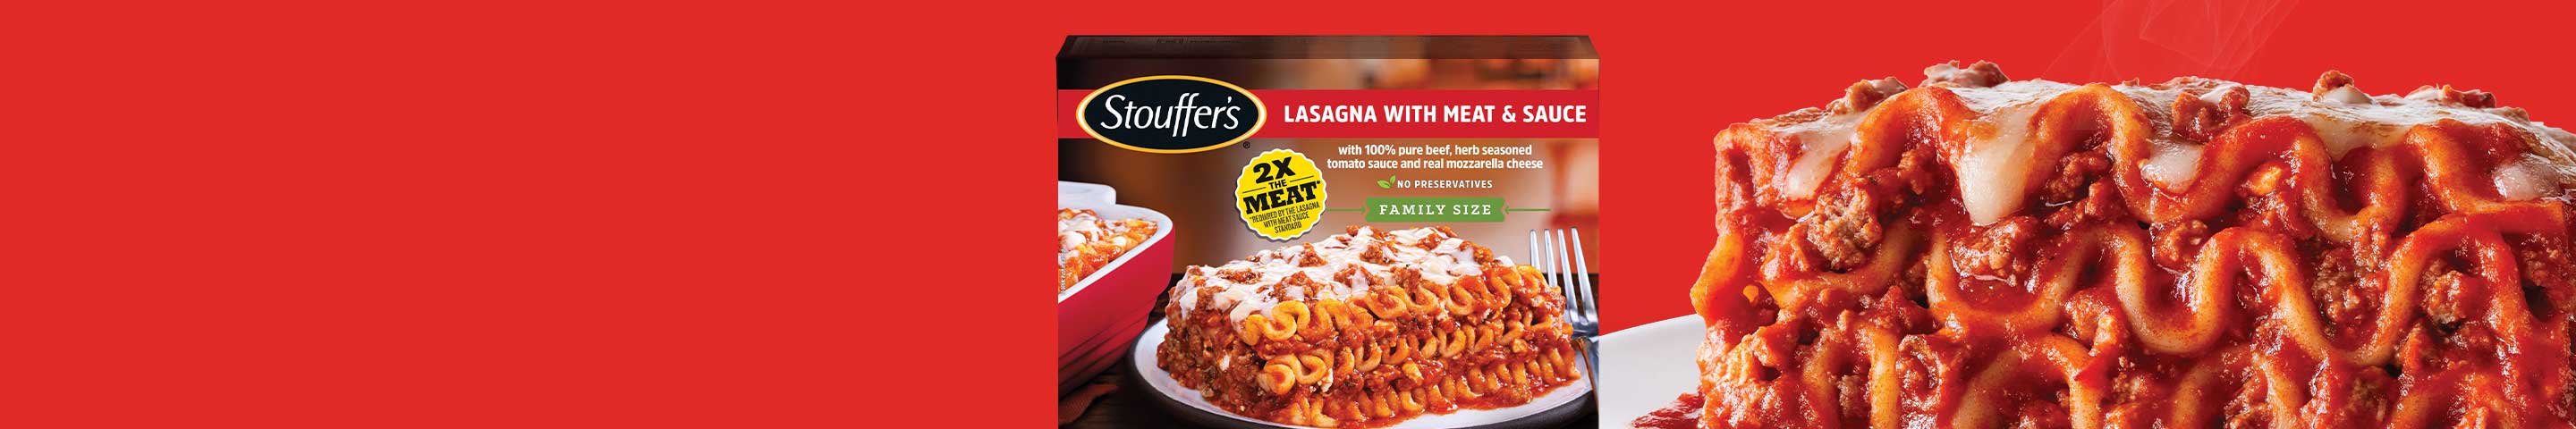 Stouffer's lasagna with meat and sauce